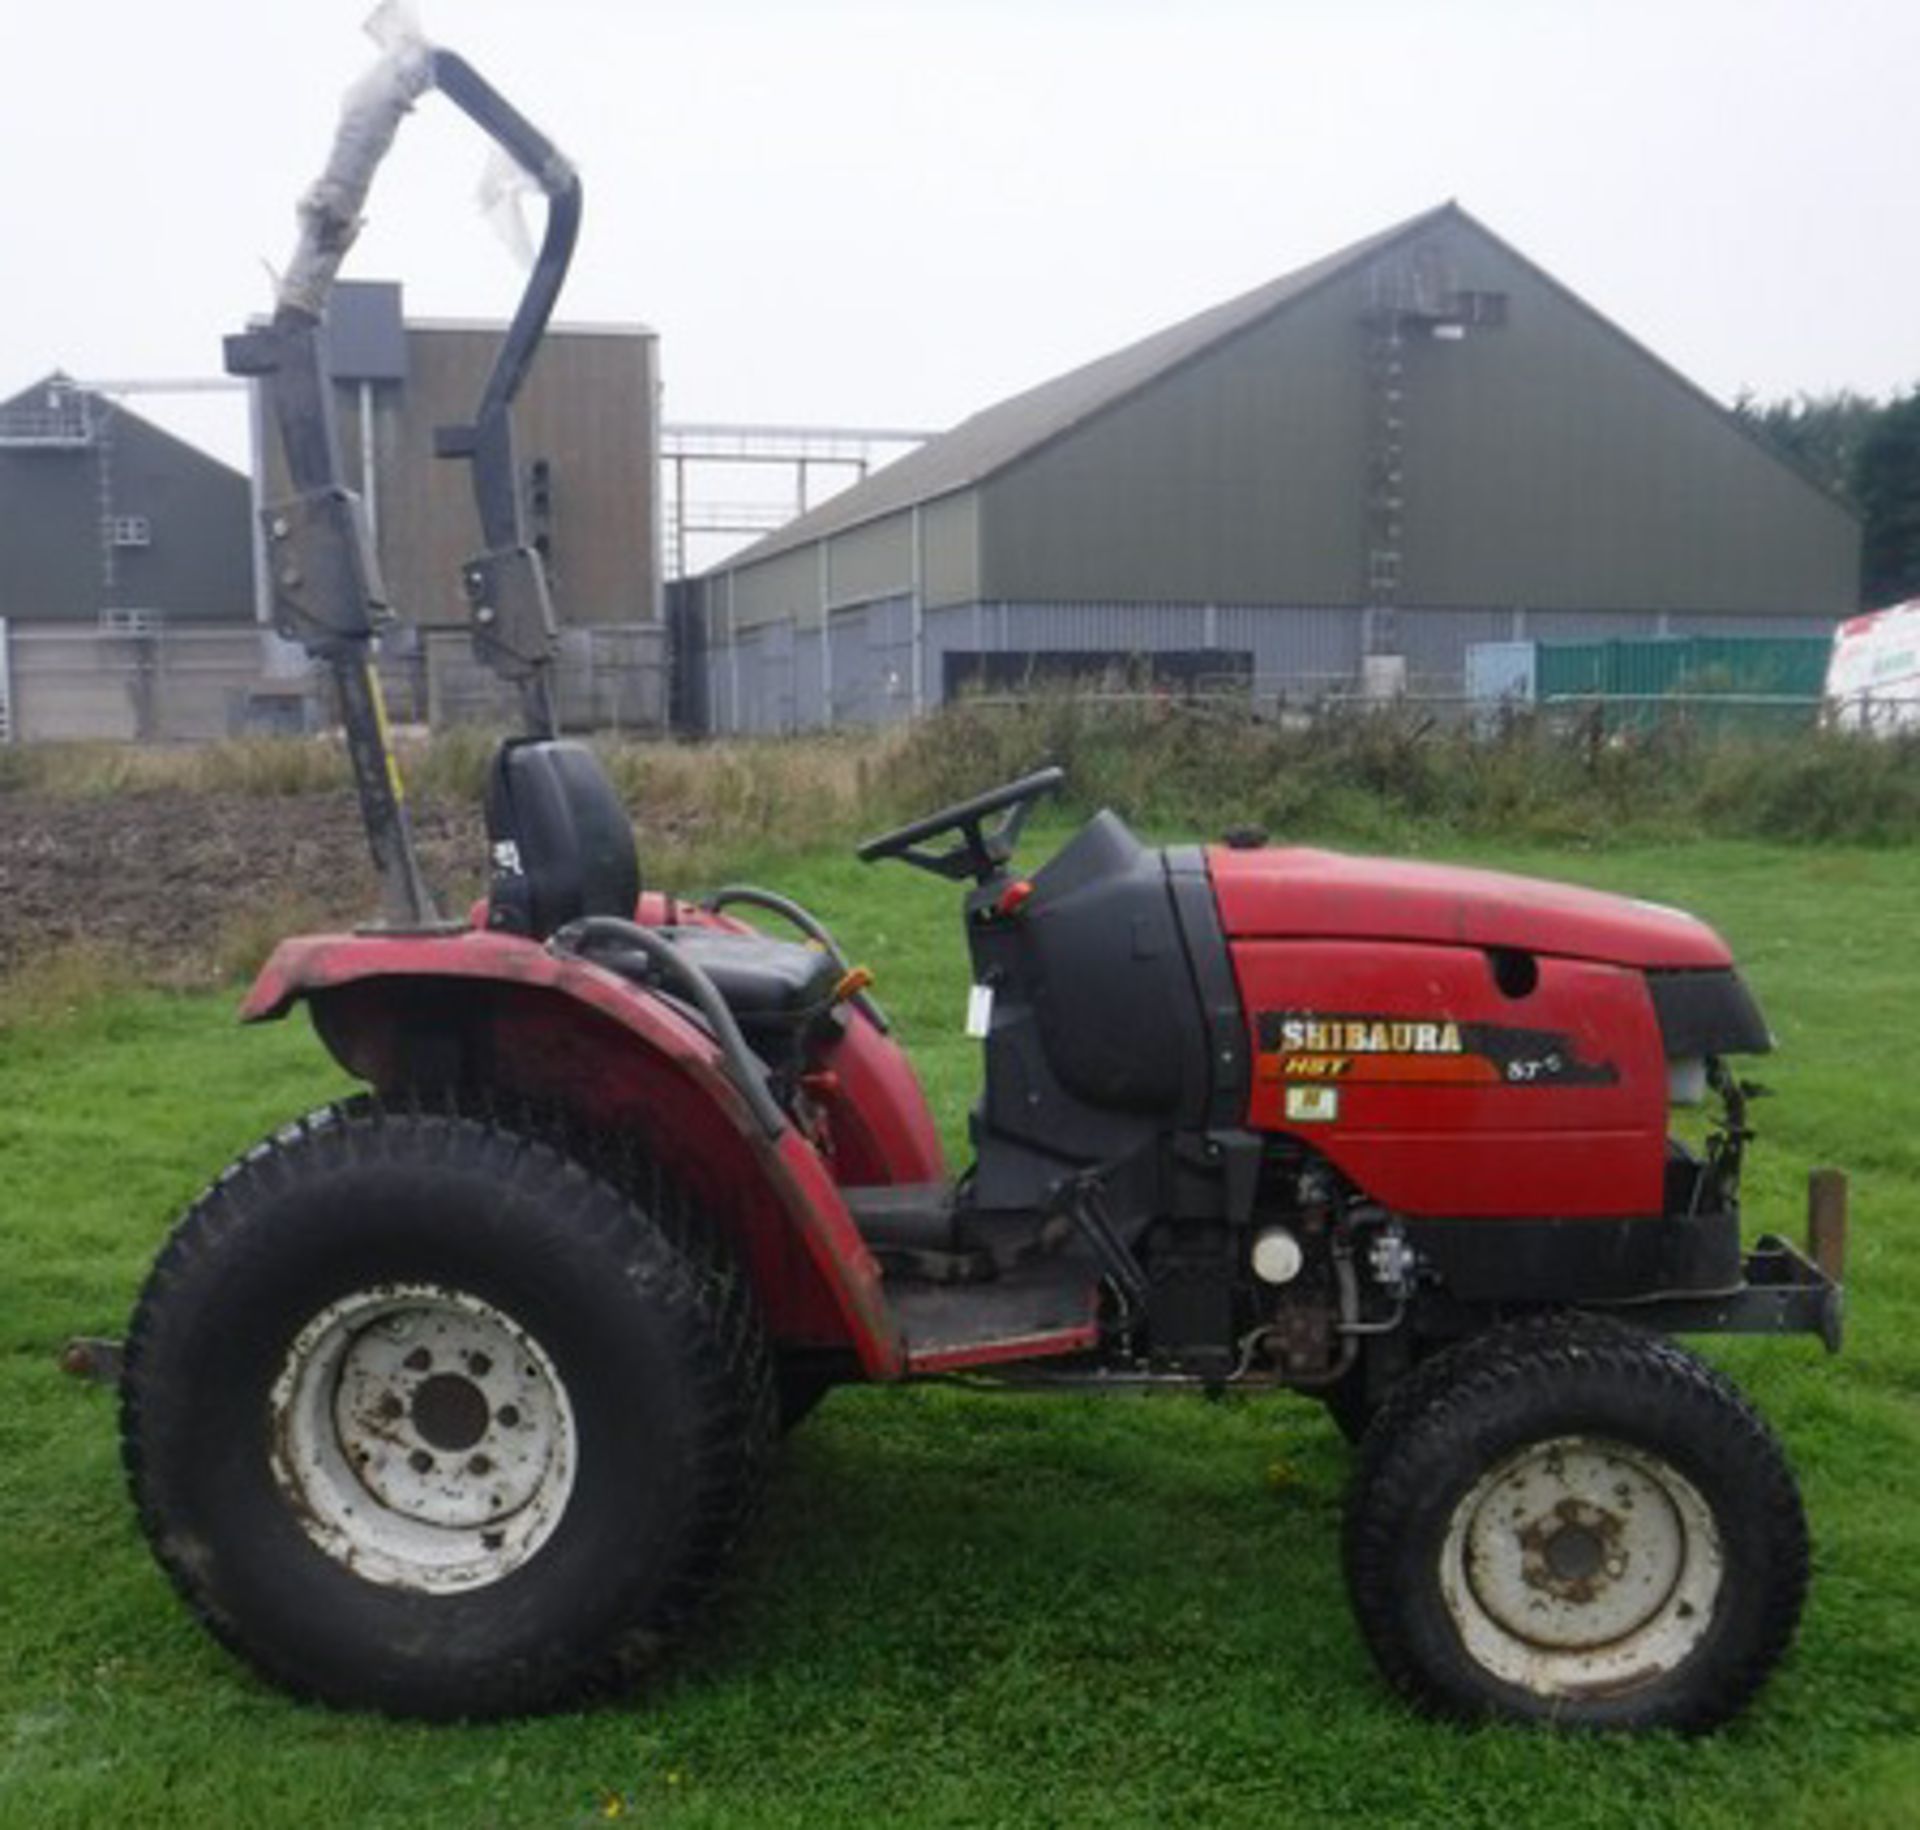 2012 SHIBAURA ST-333 compact tractor. S/N 31334, 2436hrs (not verified) CE Marked - document in offi - Image 4 of 9